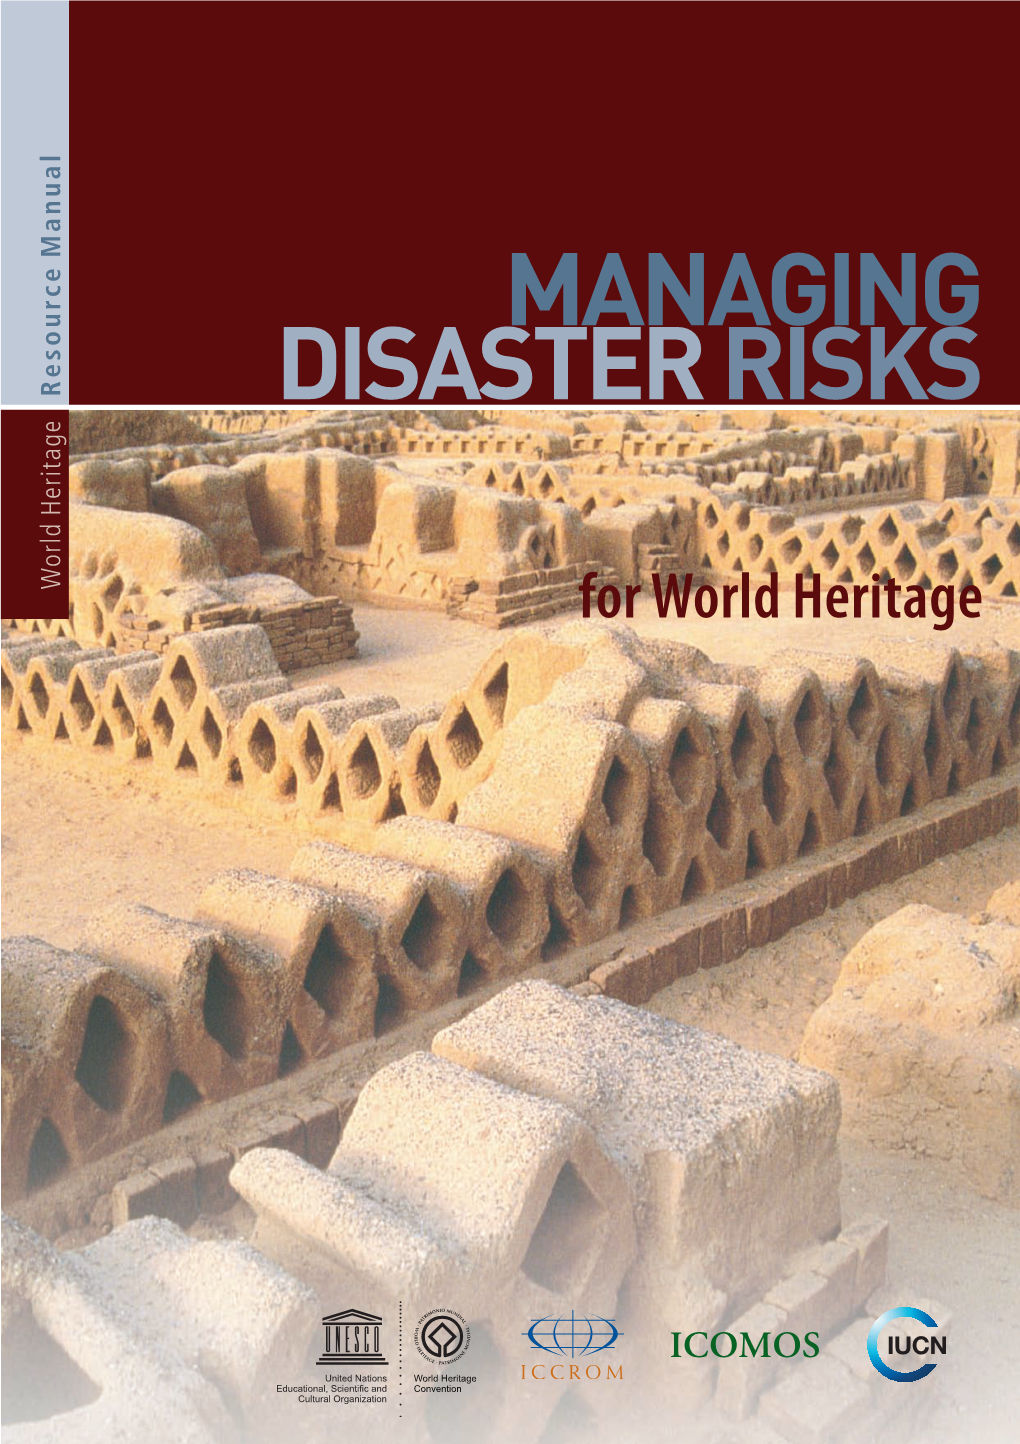 Managing Disaster Risks for World Heritage Published in June 2010 by the United Nations Educational, Scientific and Cultural Organization